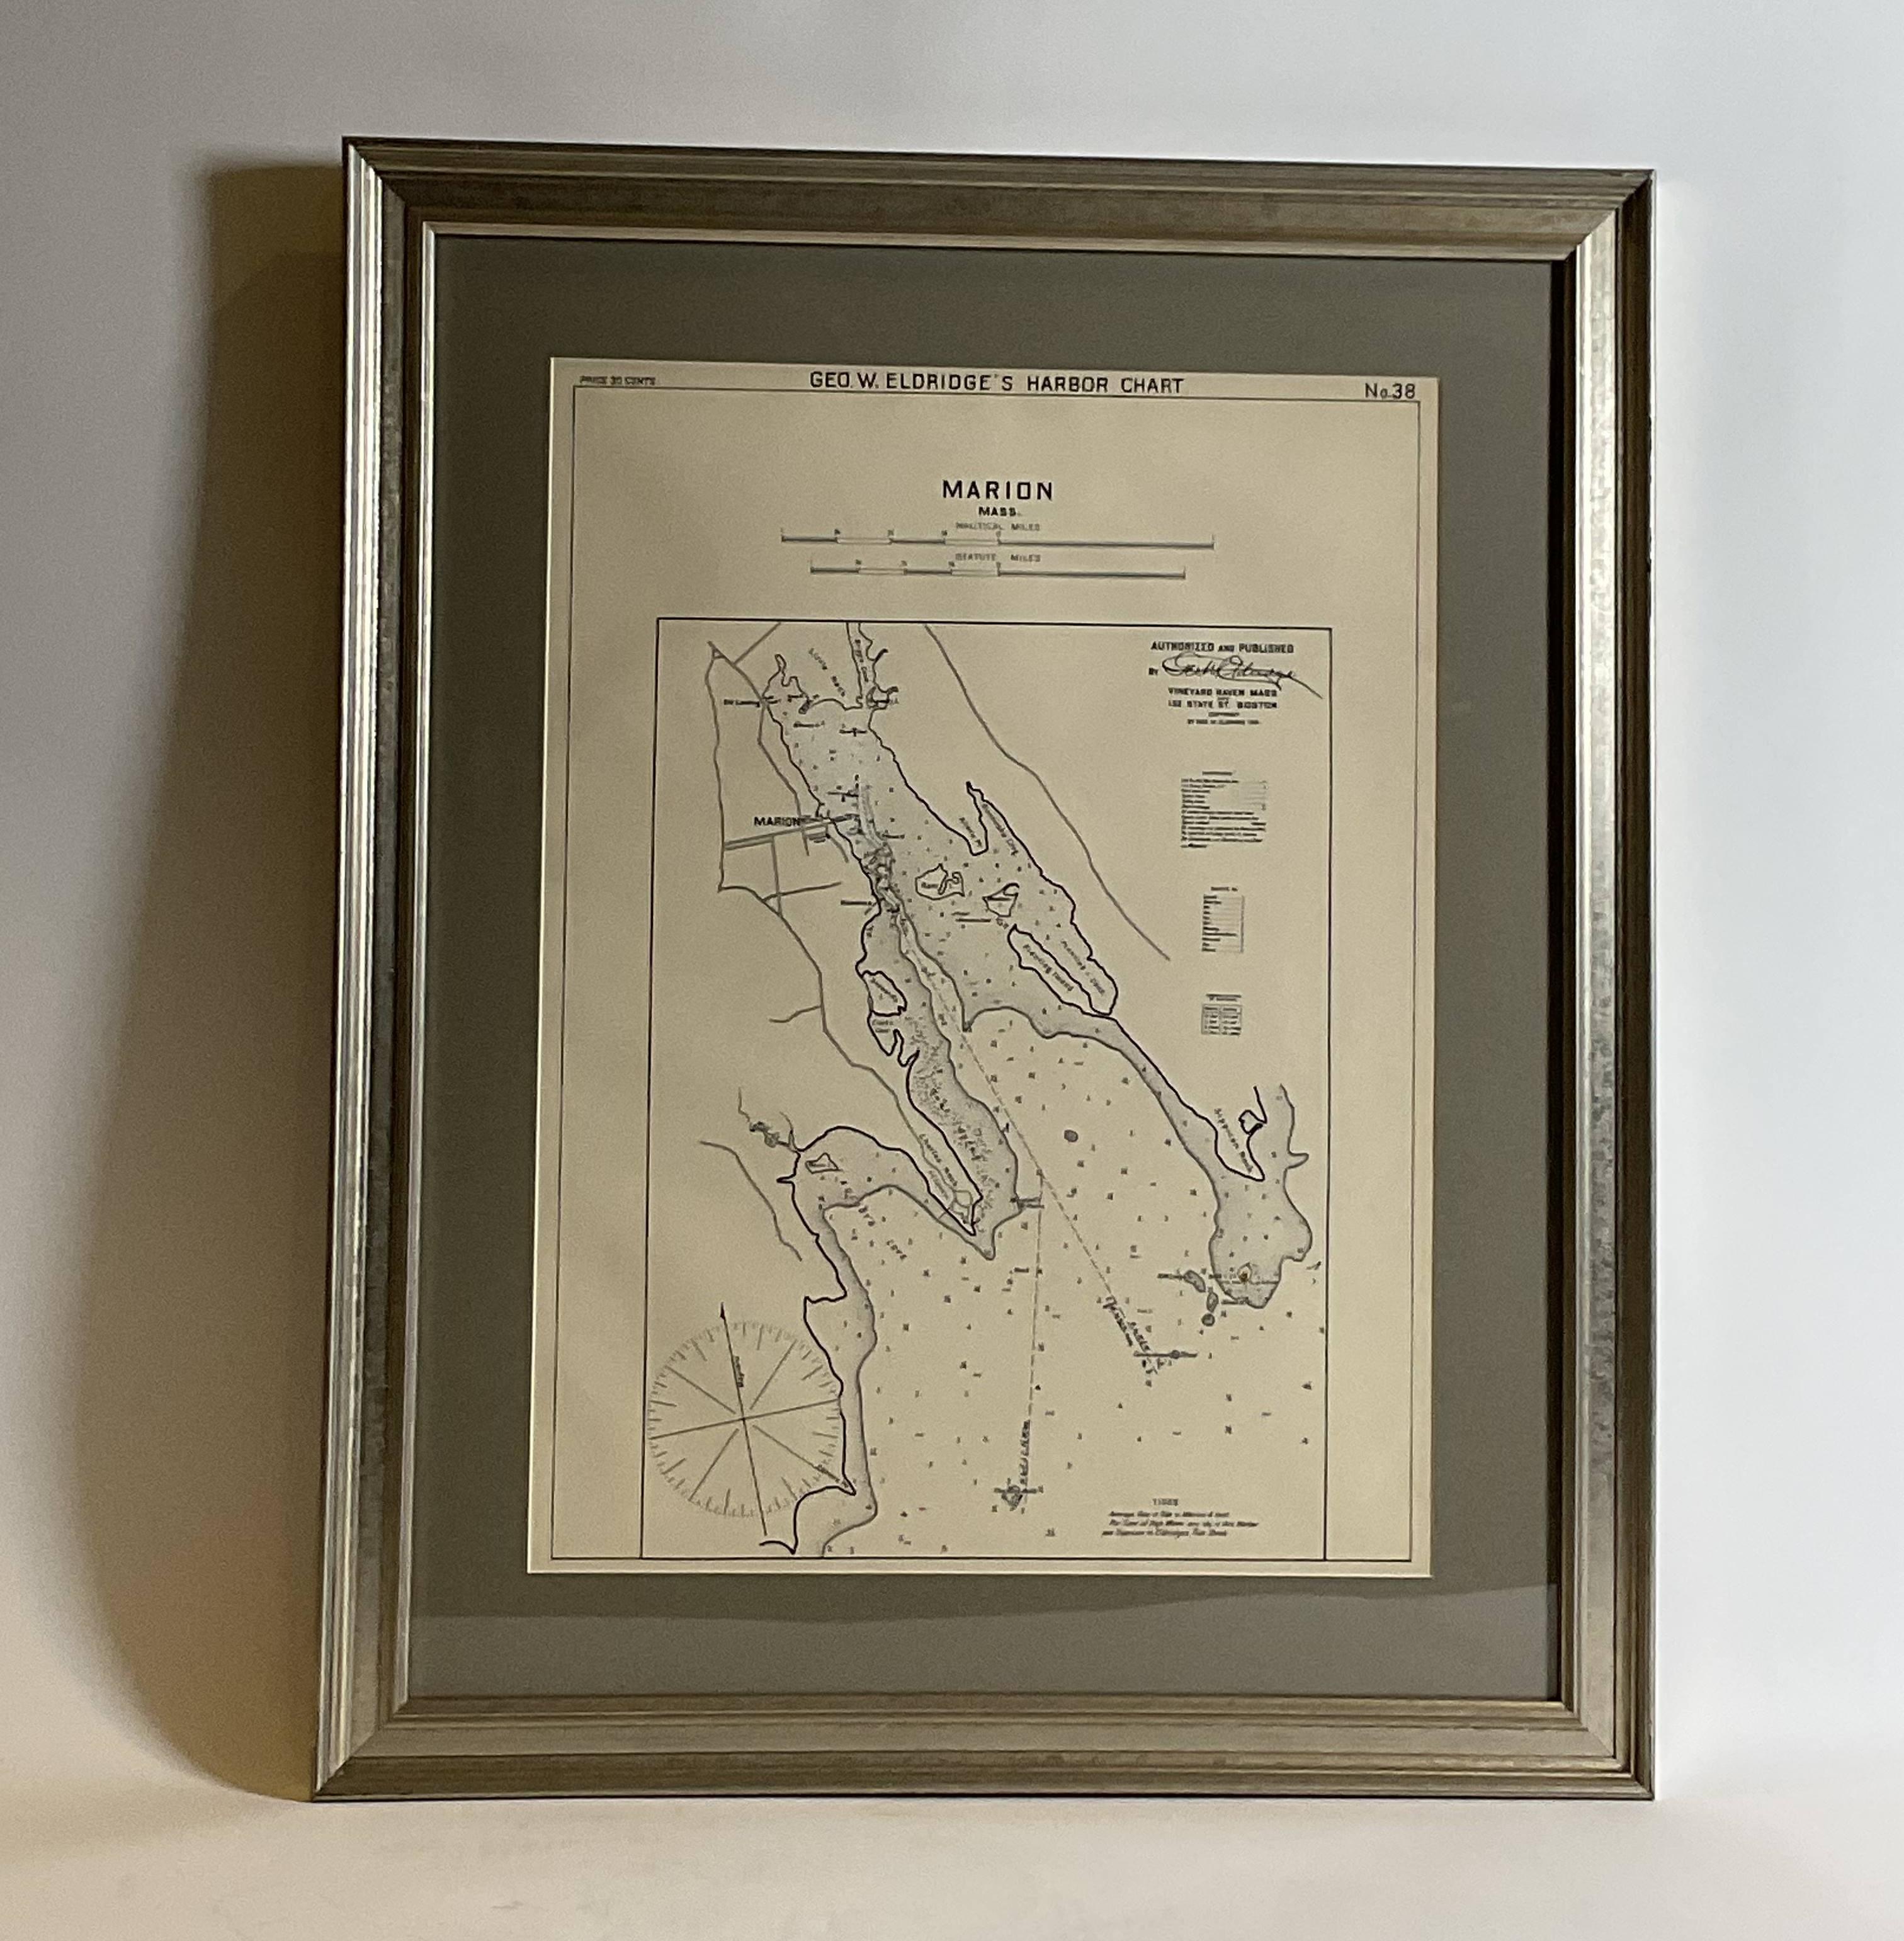 North American Mariners Chart of Marion Massachussets by George Eldridge 1901 For Sale